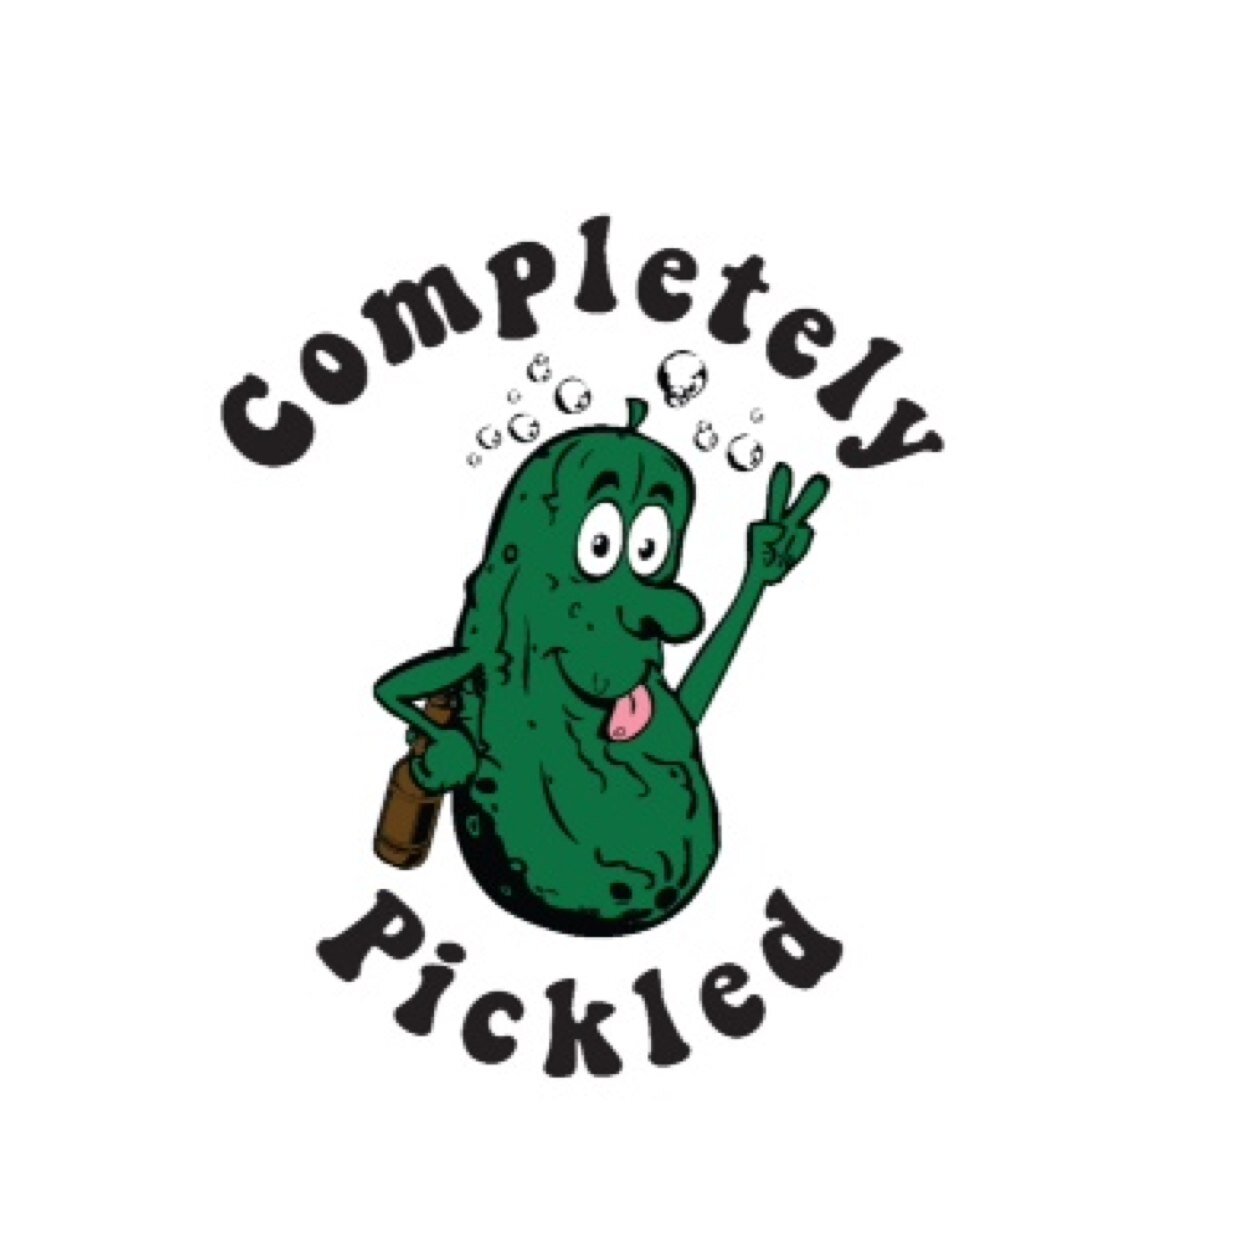 Some of u know me as Shreds/Shredder now I'm pickledudeguy, creator of Completely Pickled, gourmet pickled products.Catch me soon @the Herm.Beach farmers mkt.